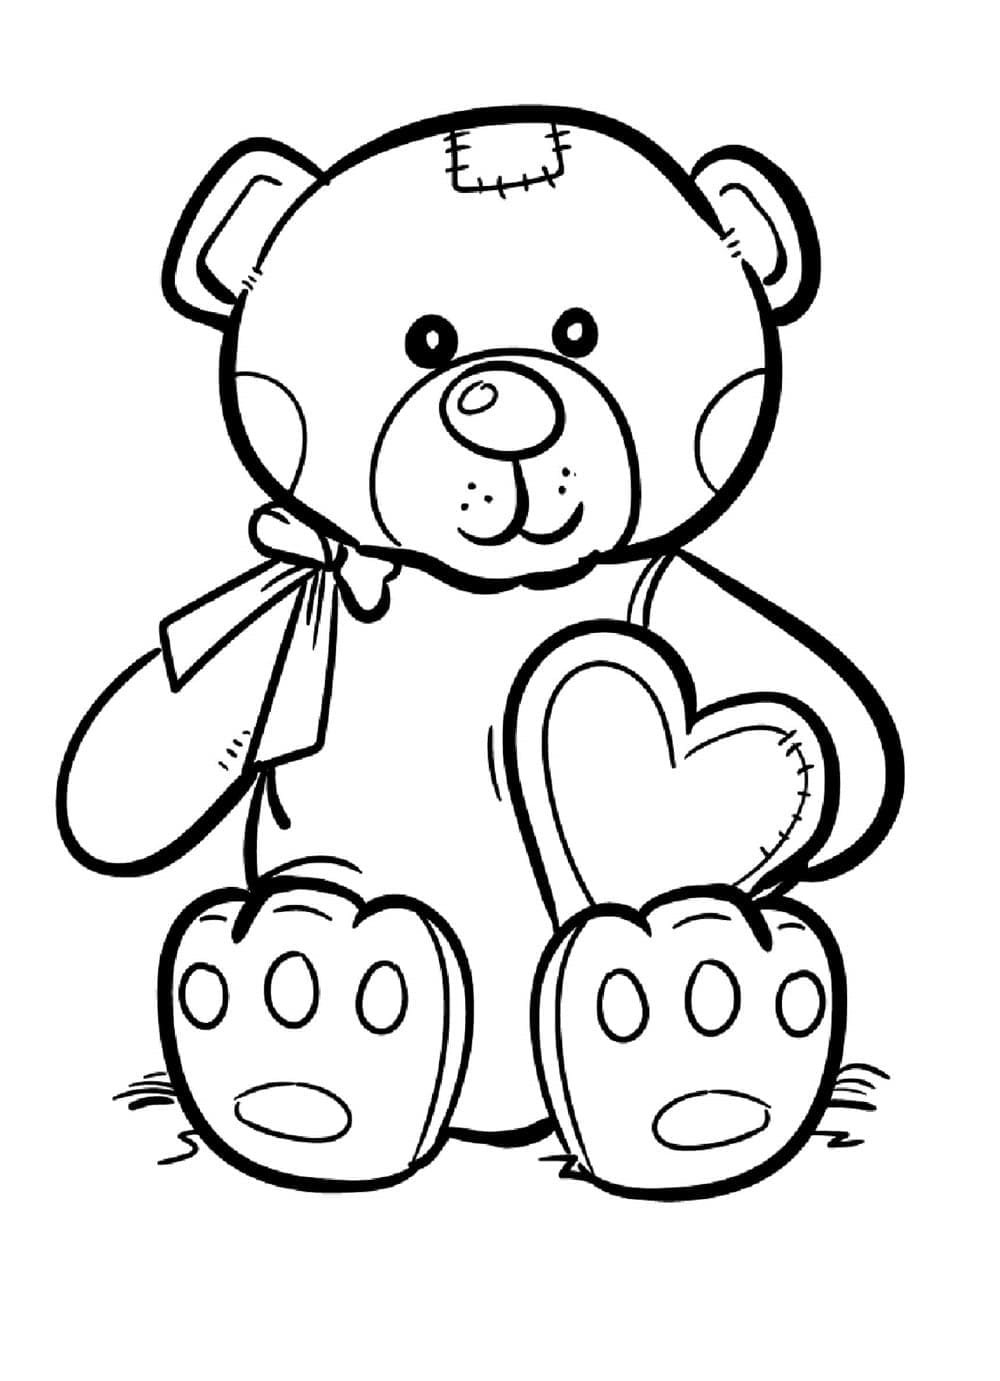 Printable Drawing Teddy Bear With Heart Coloring Page